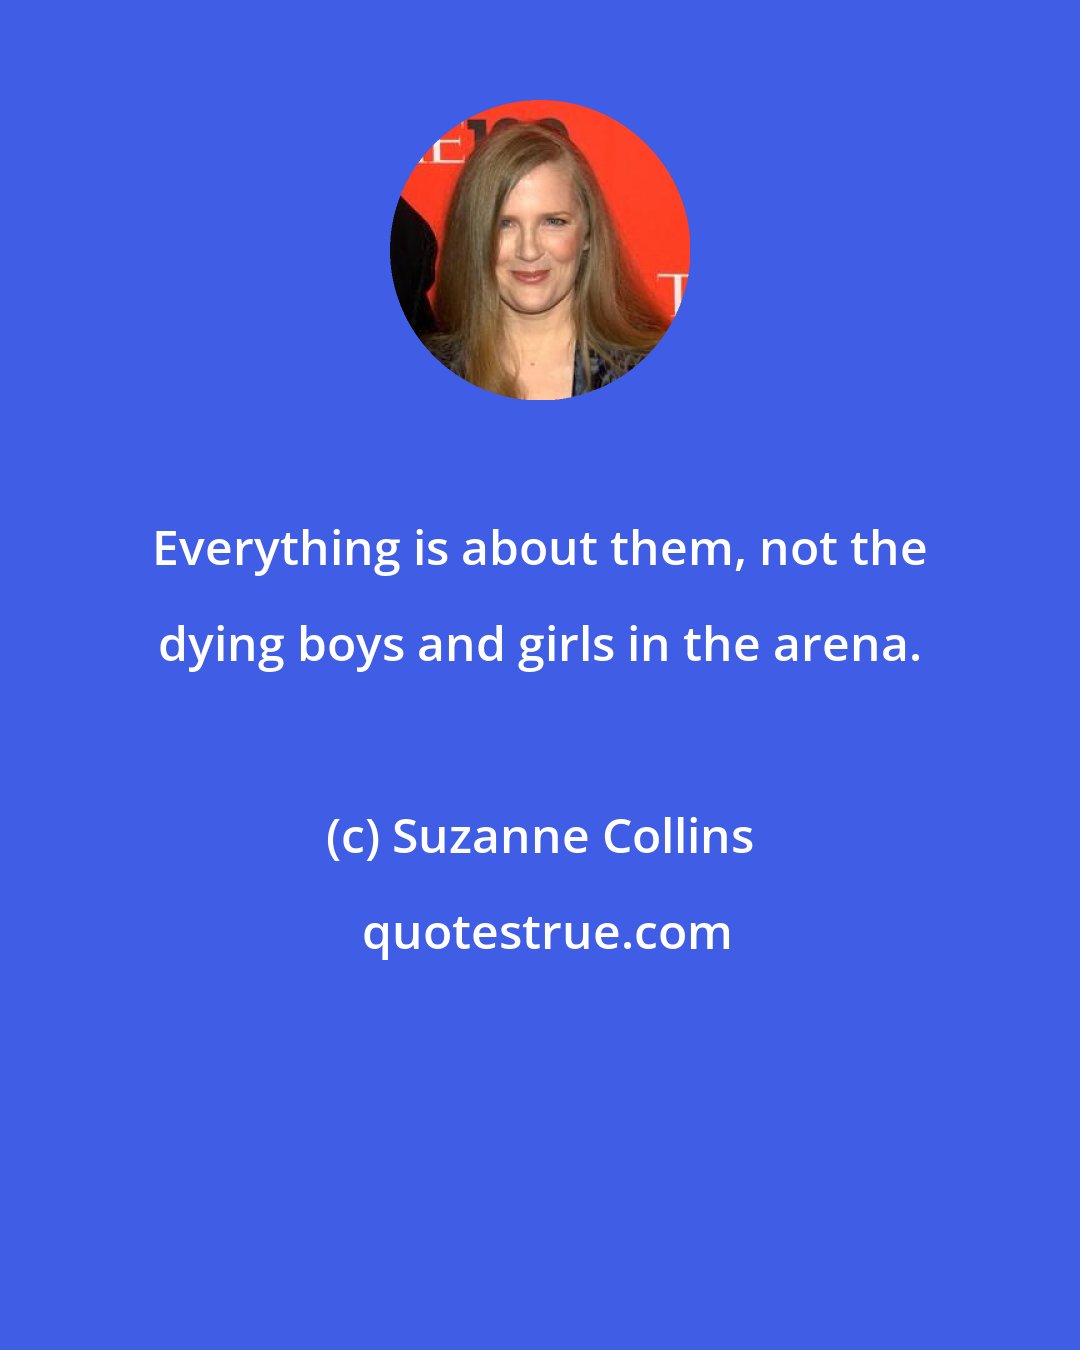 Suzanne Collins: Everything is about them, not the dying boys and girls in the arena.